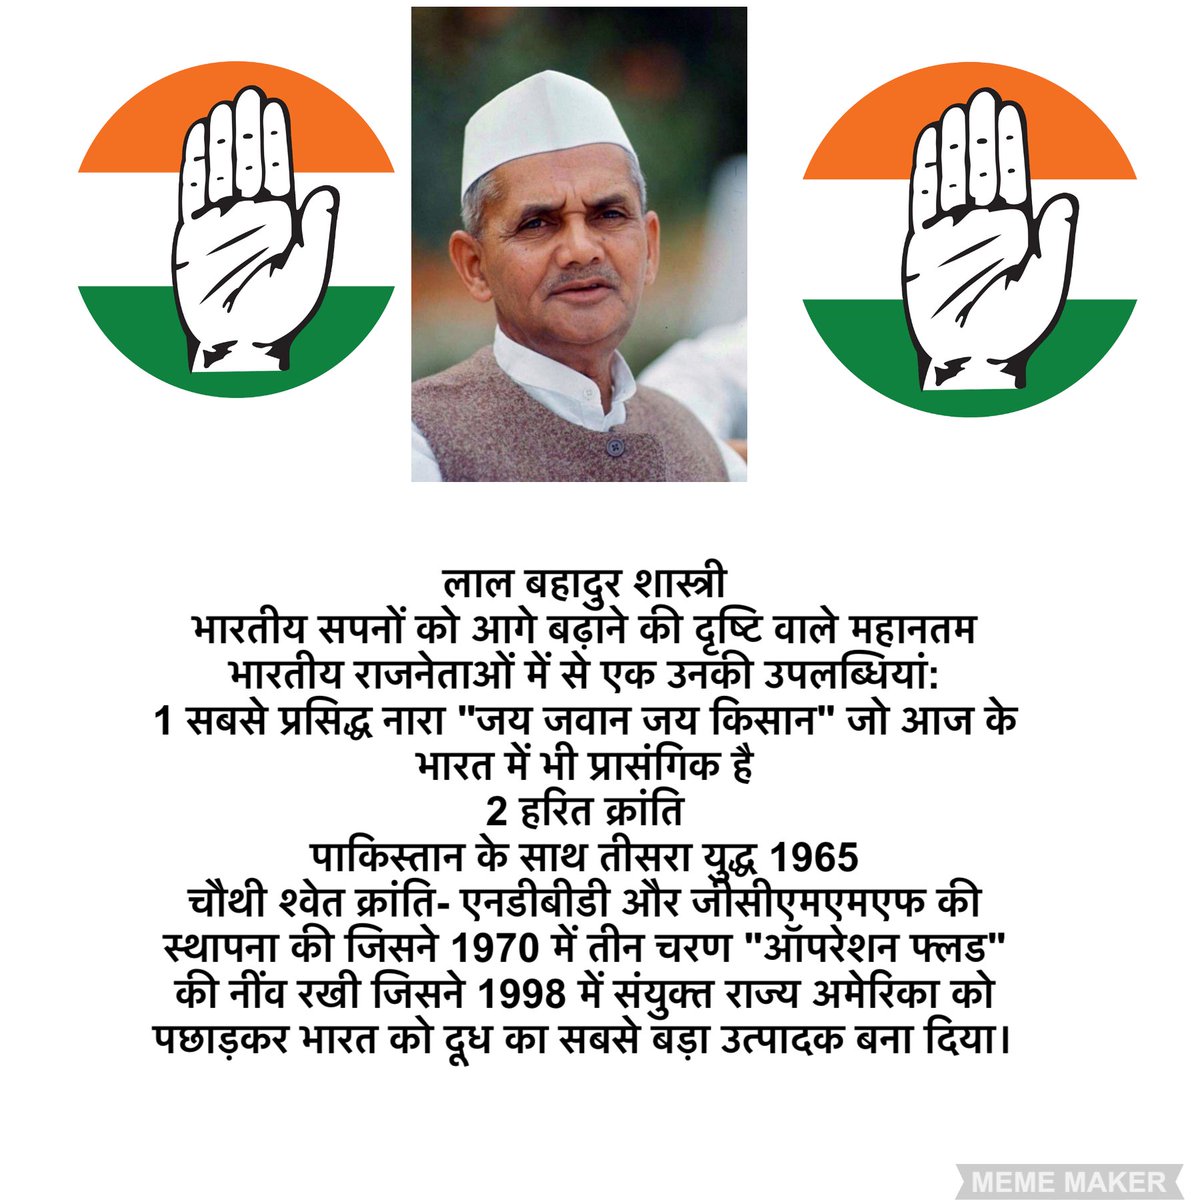 #DidYouKnow
#KnowTheFacts 
Simplicity and determination were hallmarks of 2nd Prime Minister of India Sh Lal Bahadur Shastri 
#IndiaProgressesWithCongress
#55Years_with_Congress
 @INCIndia @INC_Television @IYC